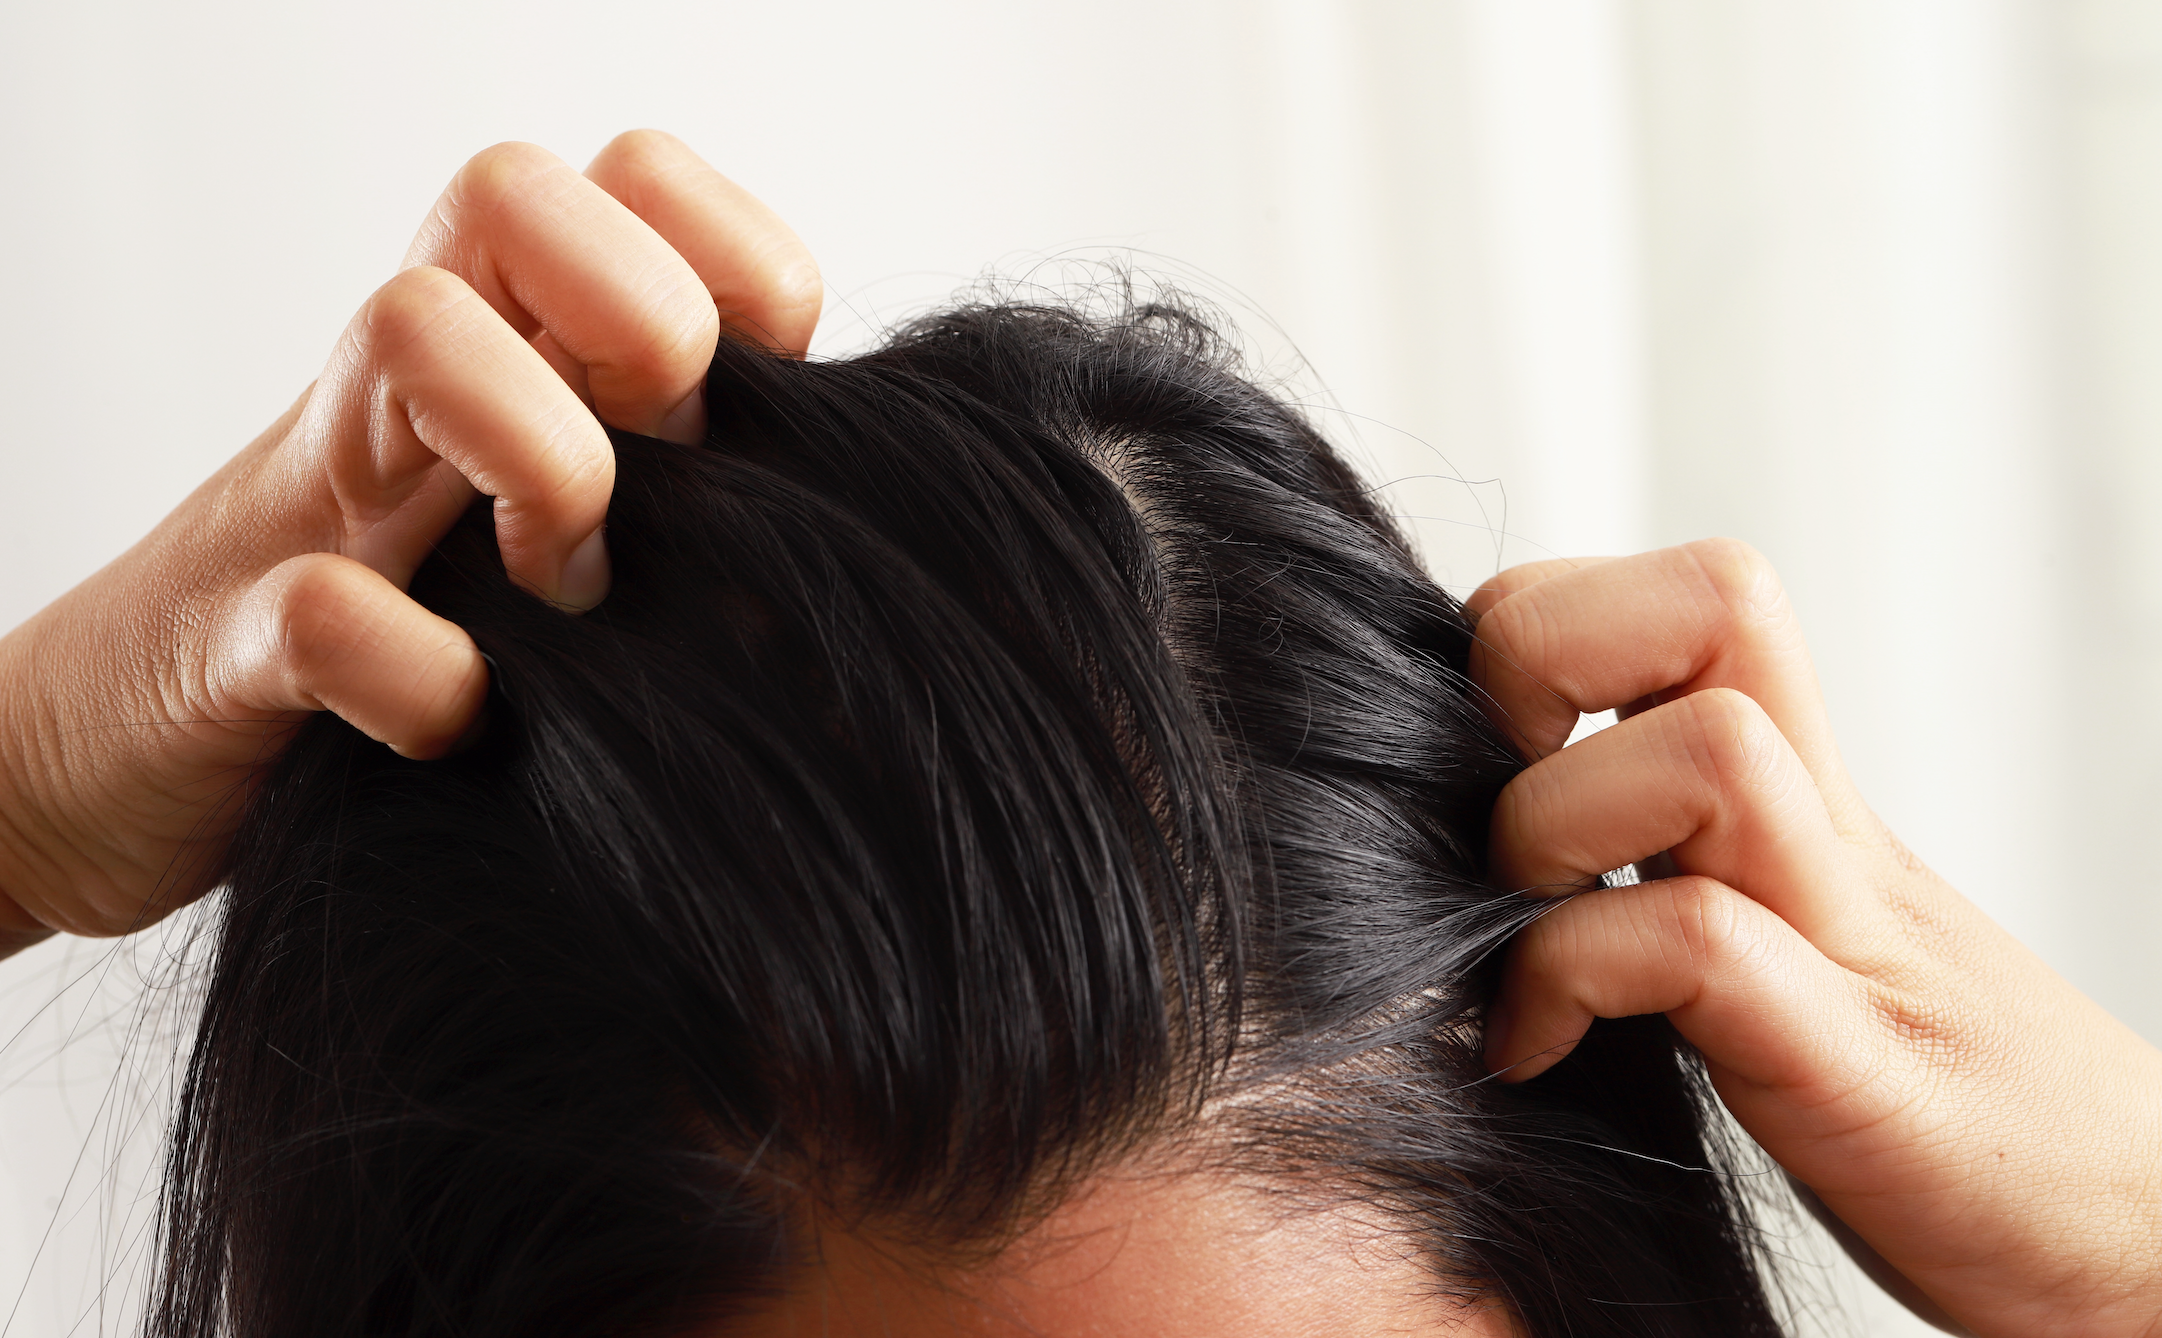 How To Get Rid of Scalp Acne  Clogged Pores on Scalp  SELF